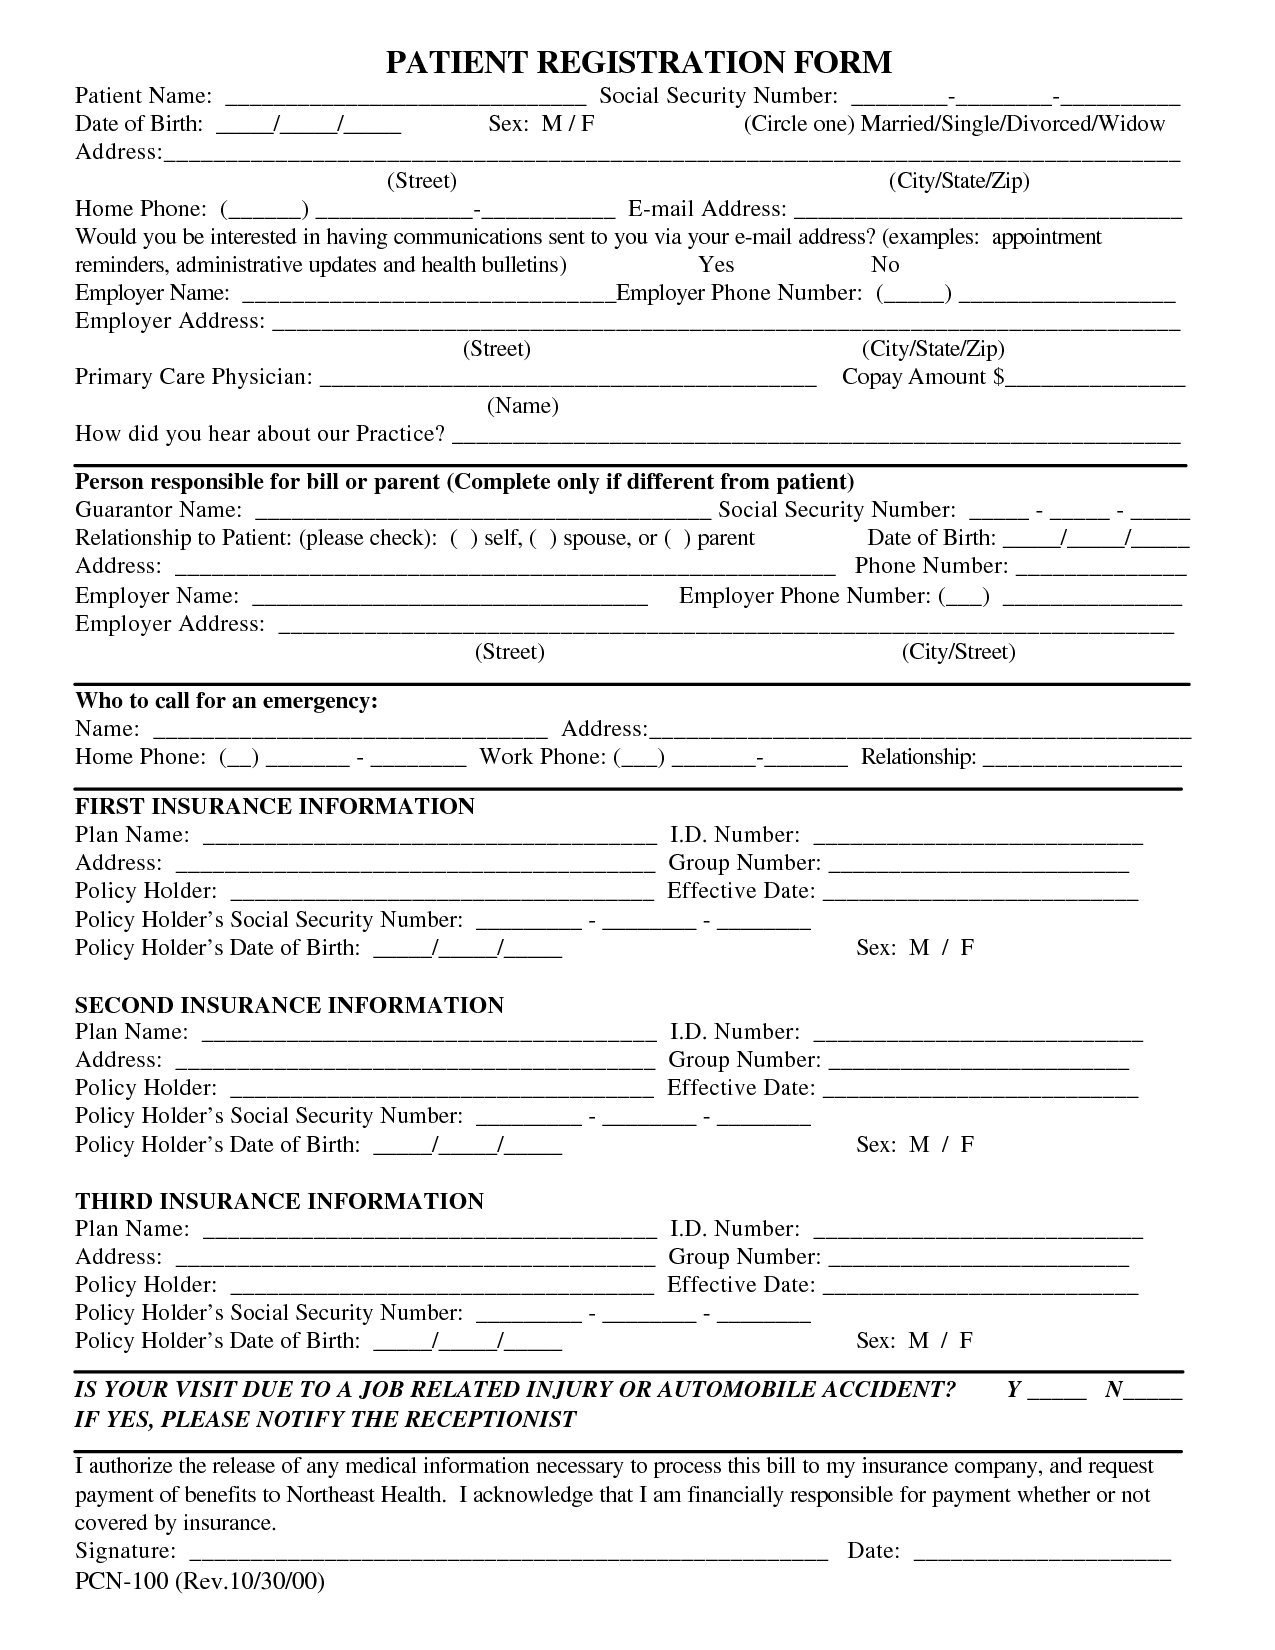 Free Patient Registration Form Template | Blank Medical Patient - Free Printable Personal Medical History Forms